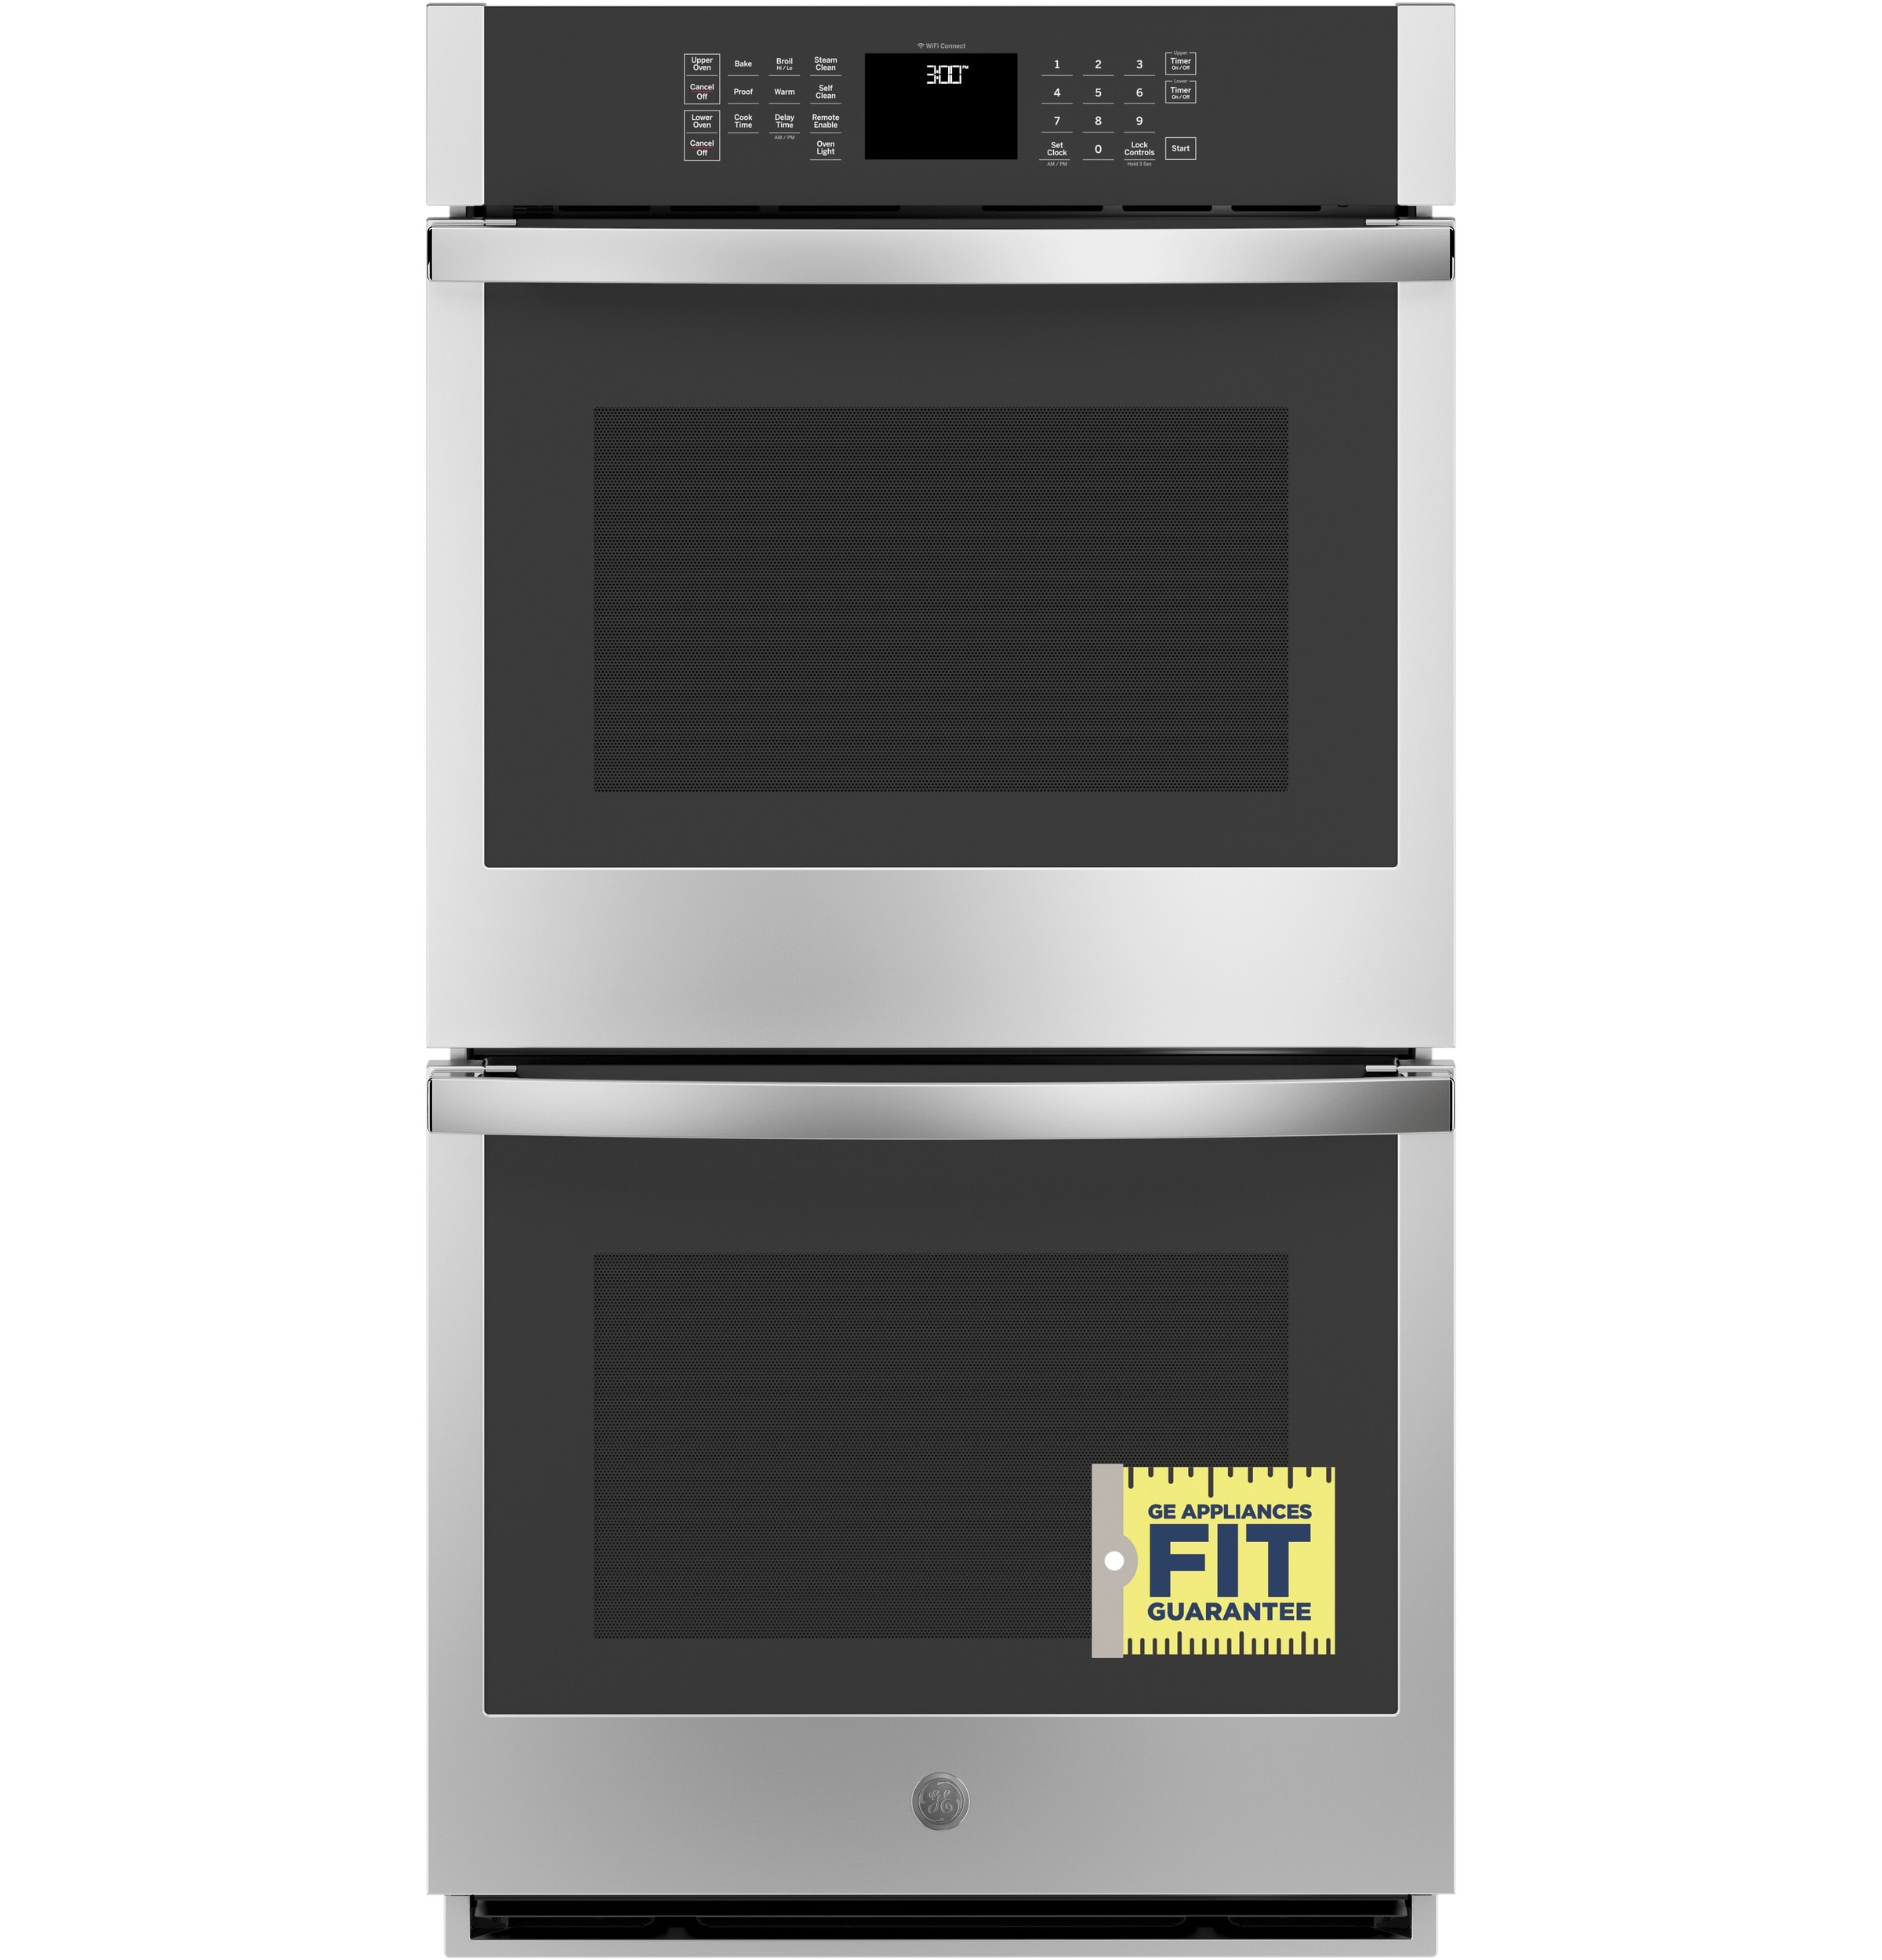 GE 27-in Smart Double Electric Wall Oven Self-cleaning (Stainless